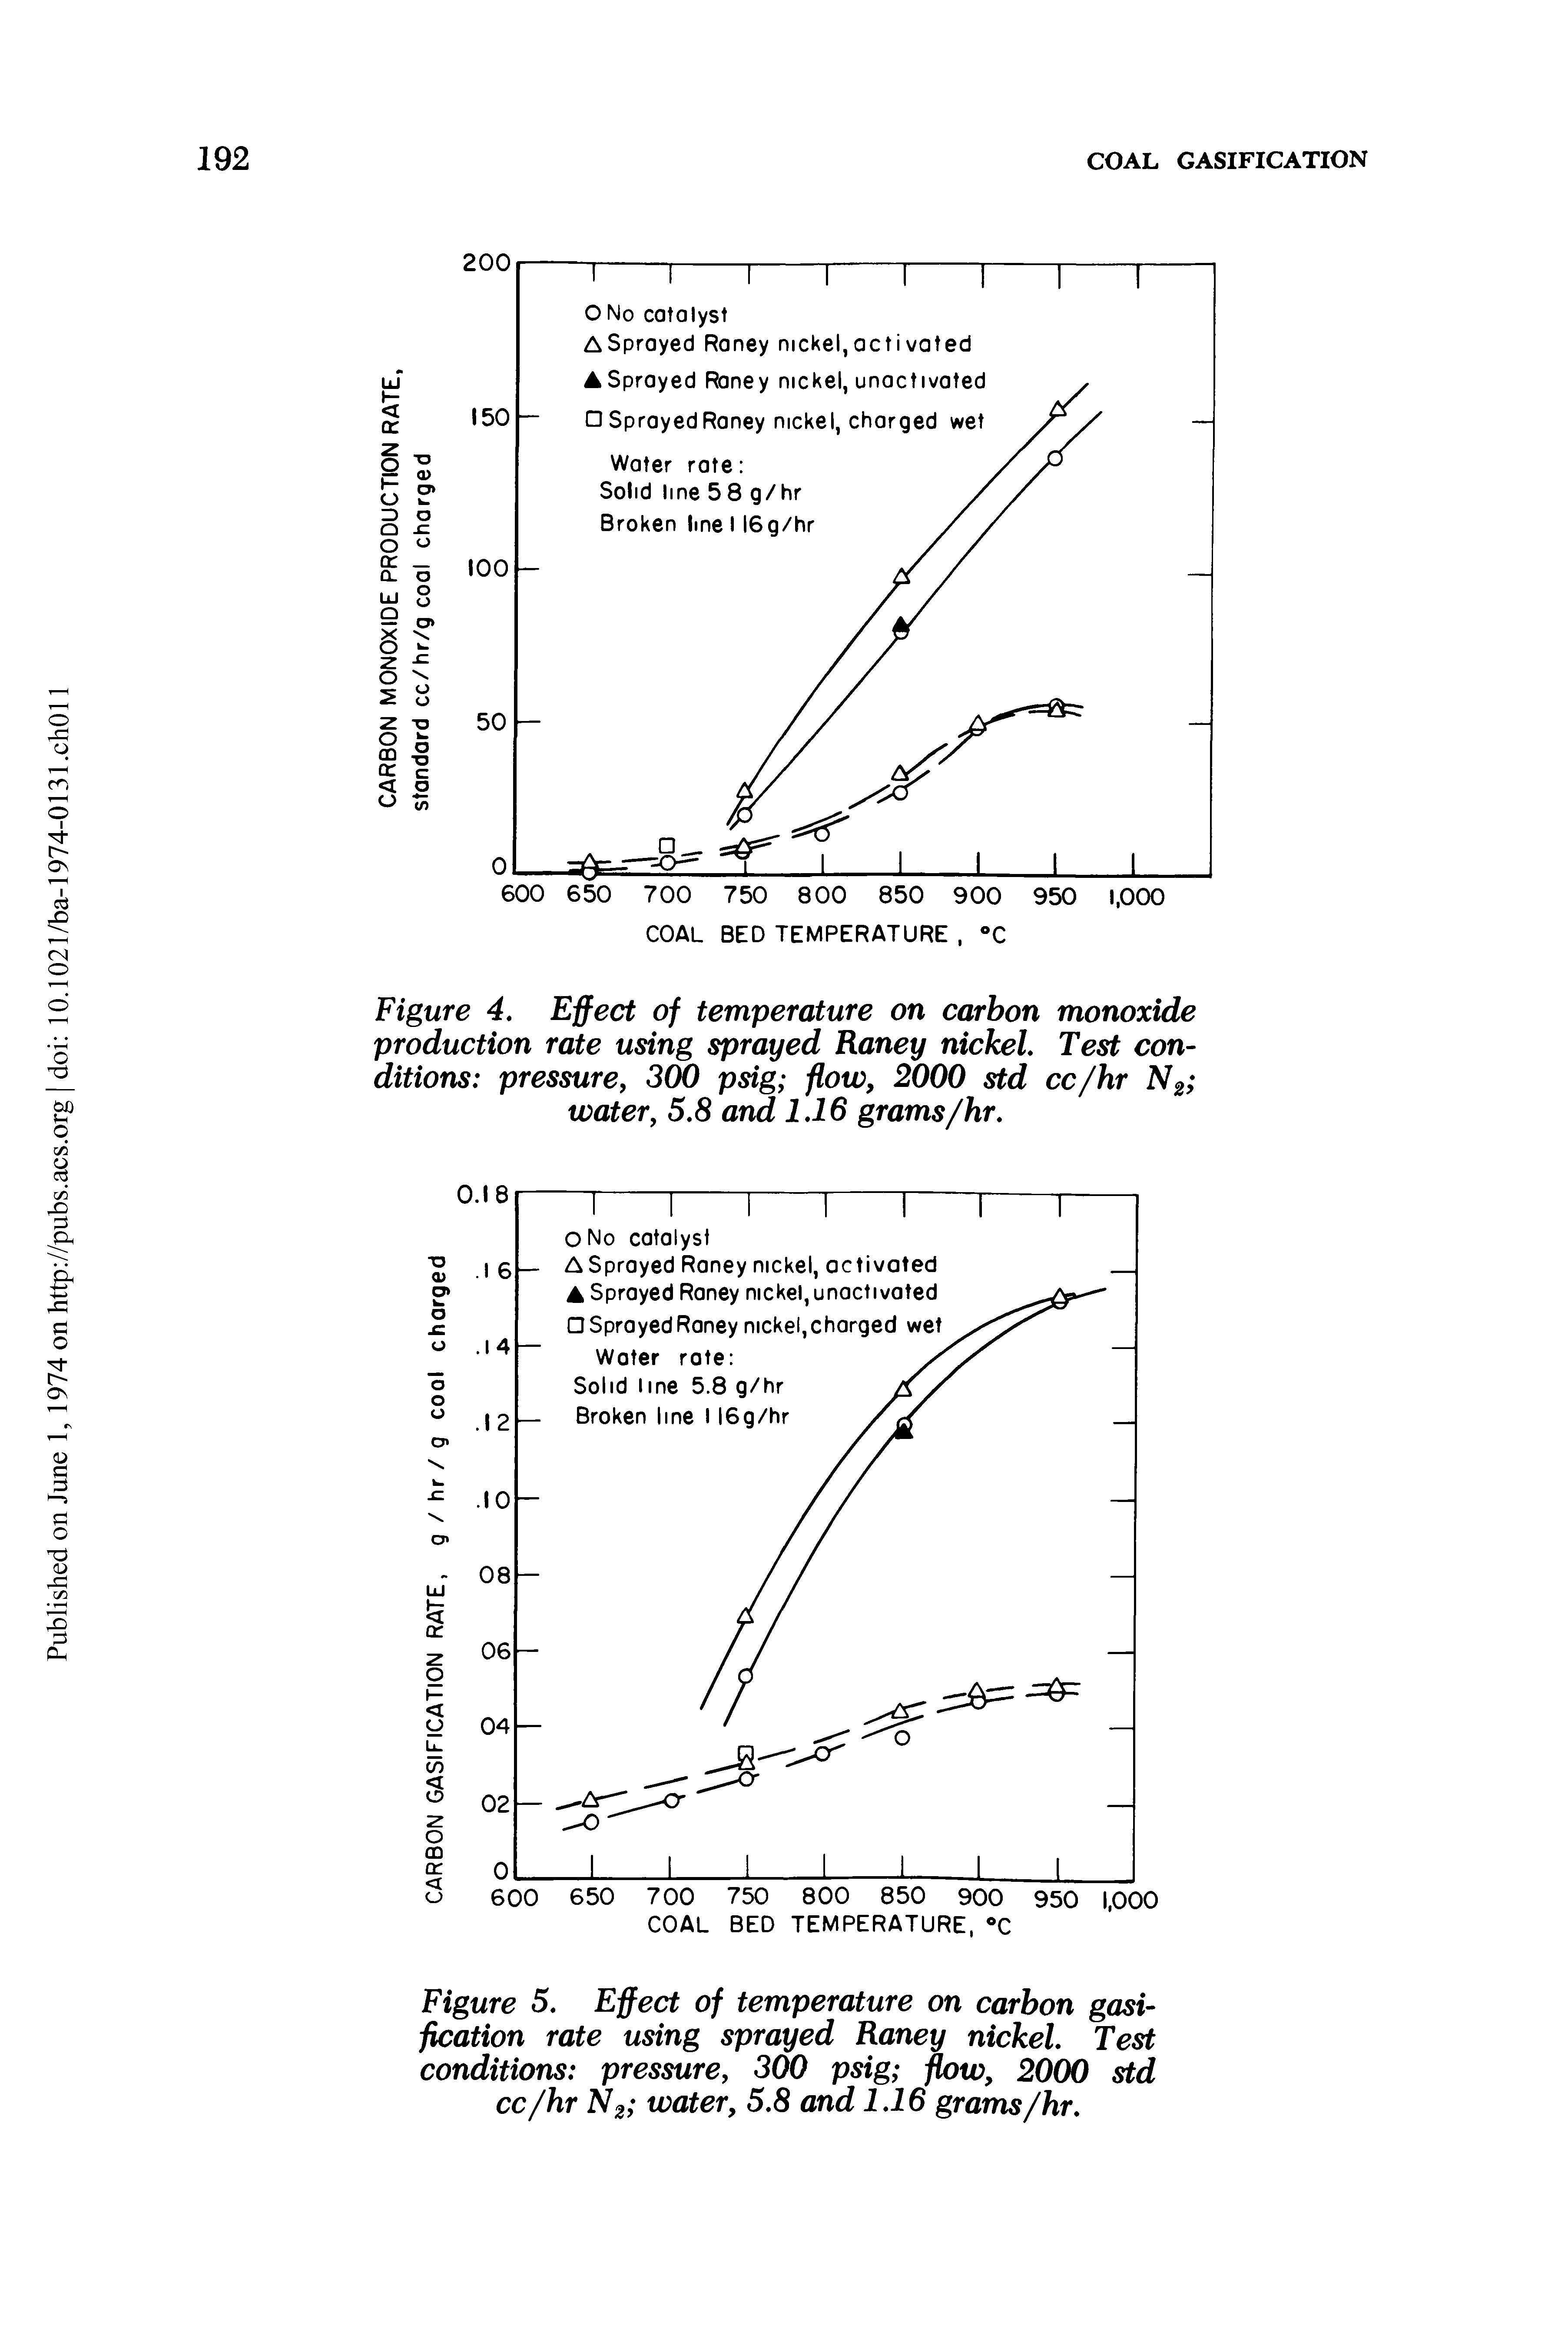 Figure 5. Effect of temperature on carbon gasification rate using sprayed Raney nickel. Test conditions pressure, 300 psig flow, 2000 std cc/hr N2 water, 5.8 and 1.16 grams/hr.